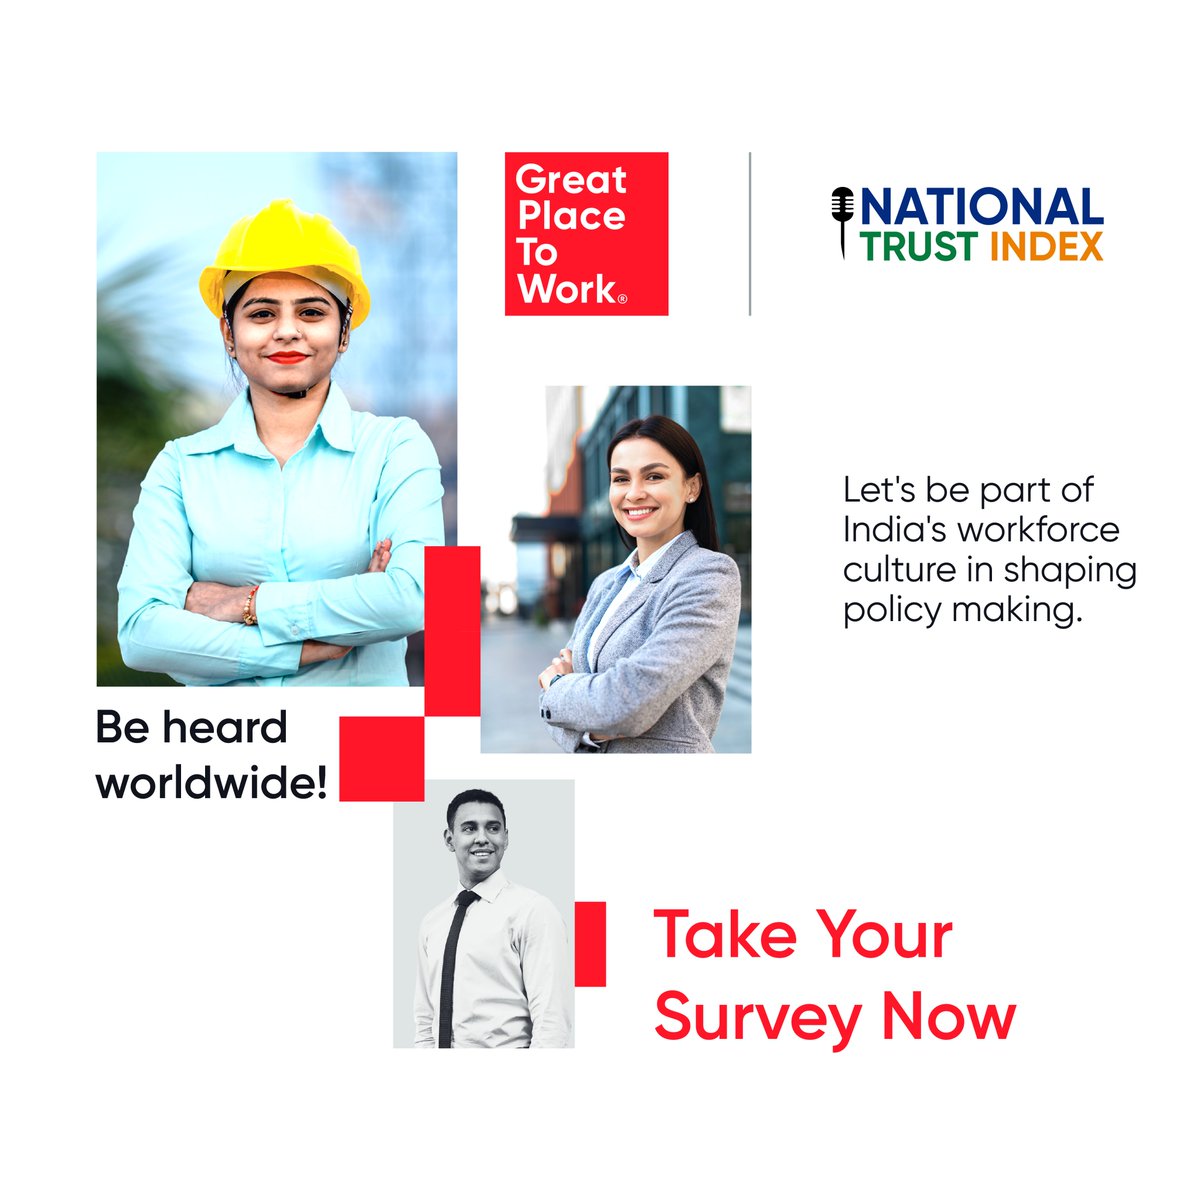 Elevate your workplace with the National Trust Index™! 
Revolutionizing workplace culture. Empower voices, drive productivity, and foster engagement. 

Learn more: bit.ly/46e4Nns

#MakingIndiaAGreatPlaceToWorkForAll #BestWorkplaces #GPTW4ALL 
#Workplaceculture #NTI